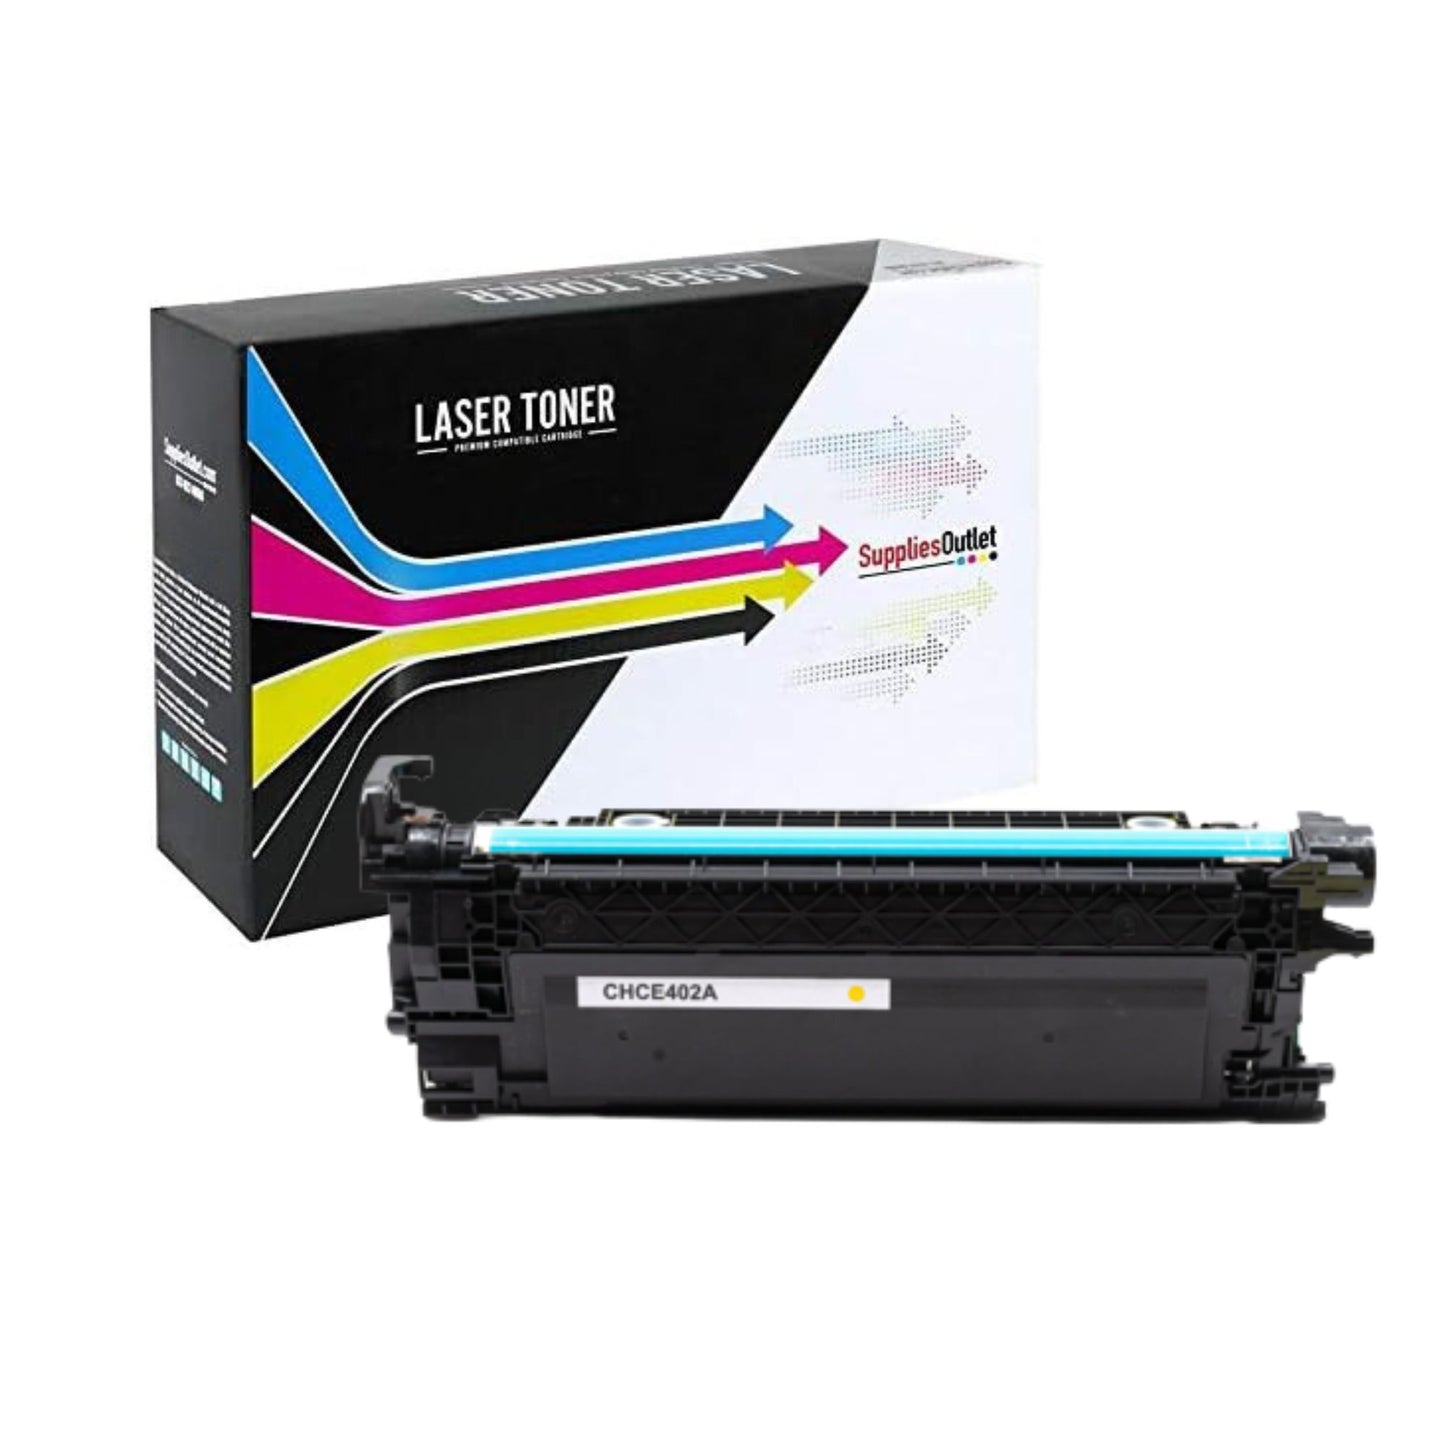 Compatible HP 507A All Colors Toner Cartridge - Black  5,500 - Color 6,000 Page Yield